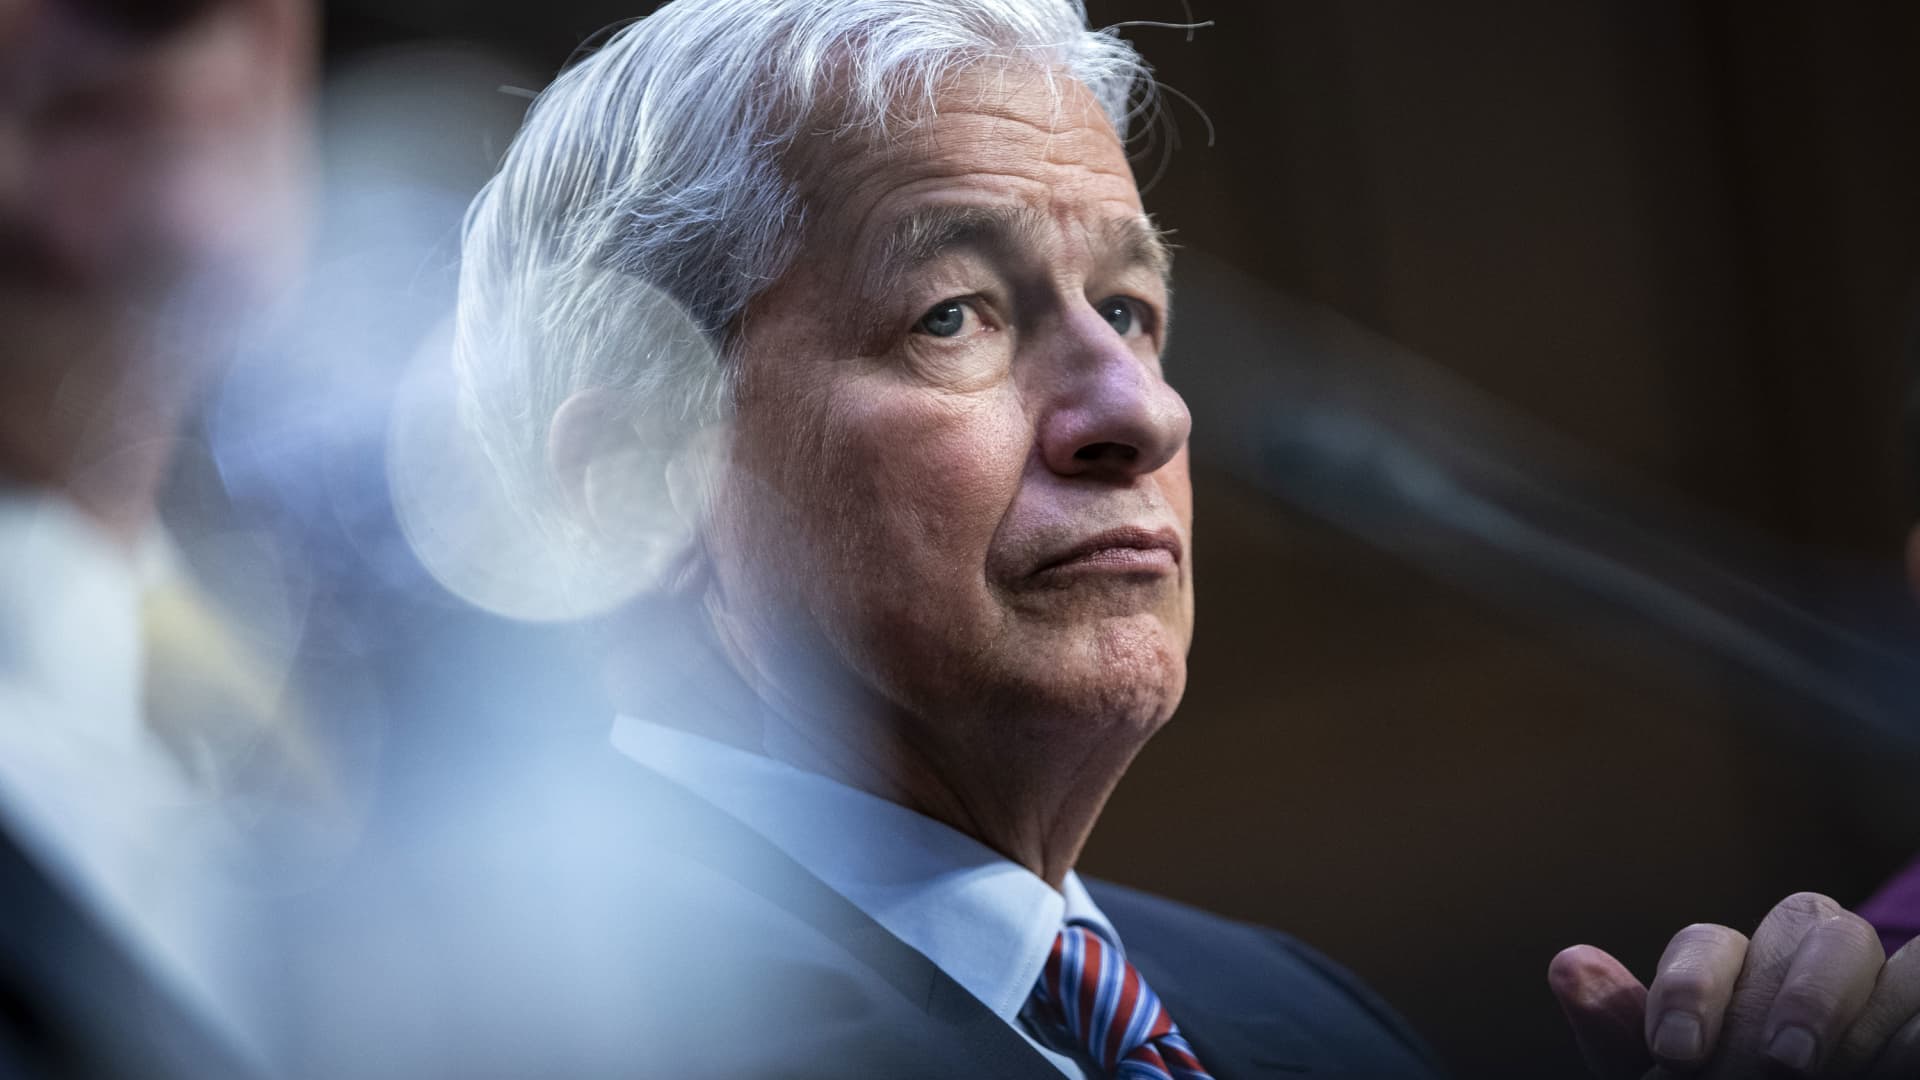 Deposition of JPMorgan CEO Dimon in Jeffrey Epstein lawsuits set for late May, source says